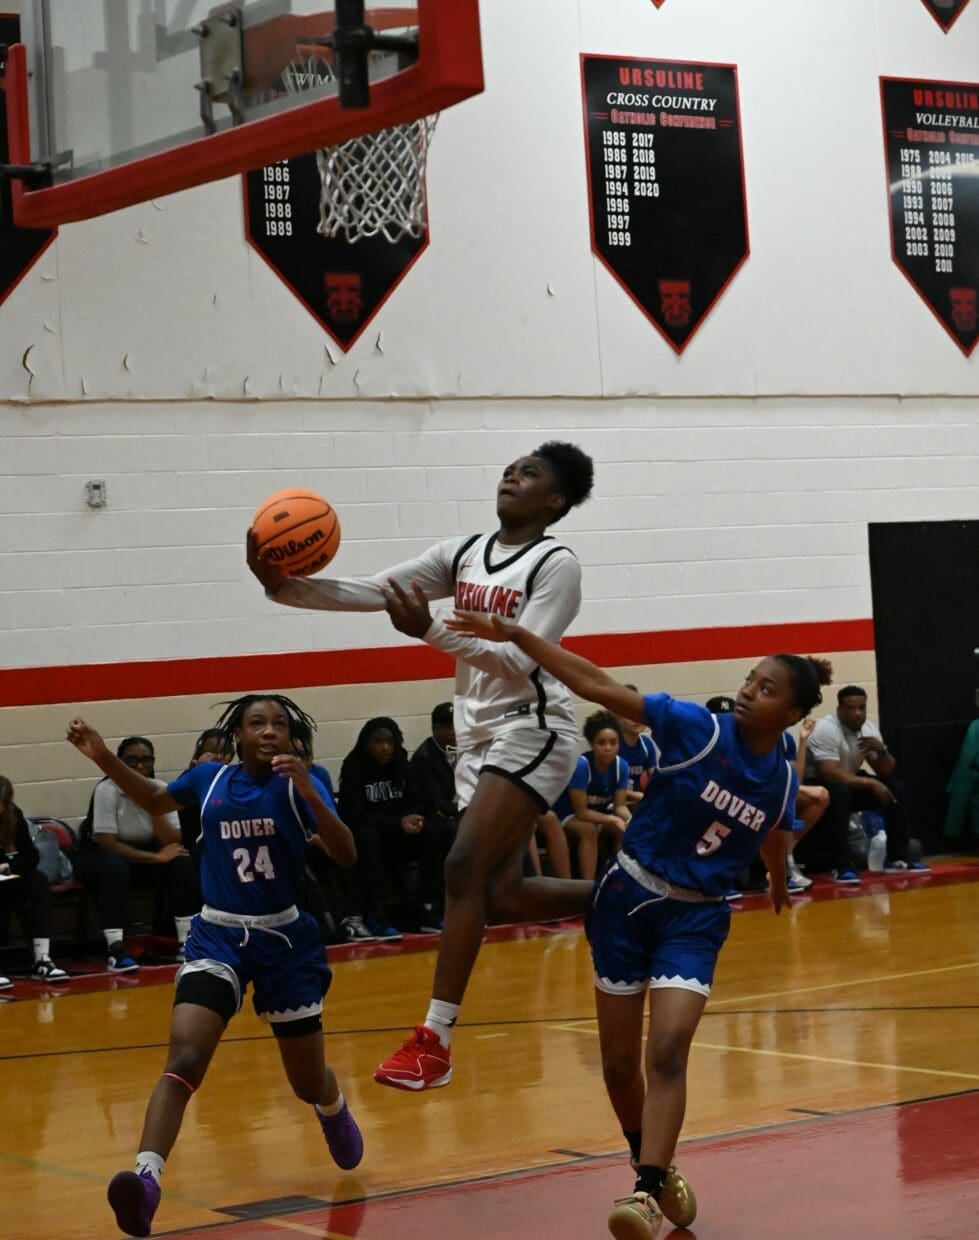 Ursuline girls basketball Jezelle GG Banks attempts a layup against Dover as she scored 32 points in the game photo courtesy of Nick Halliday